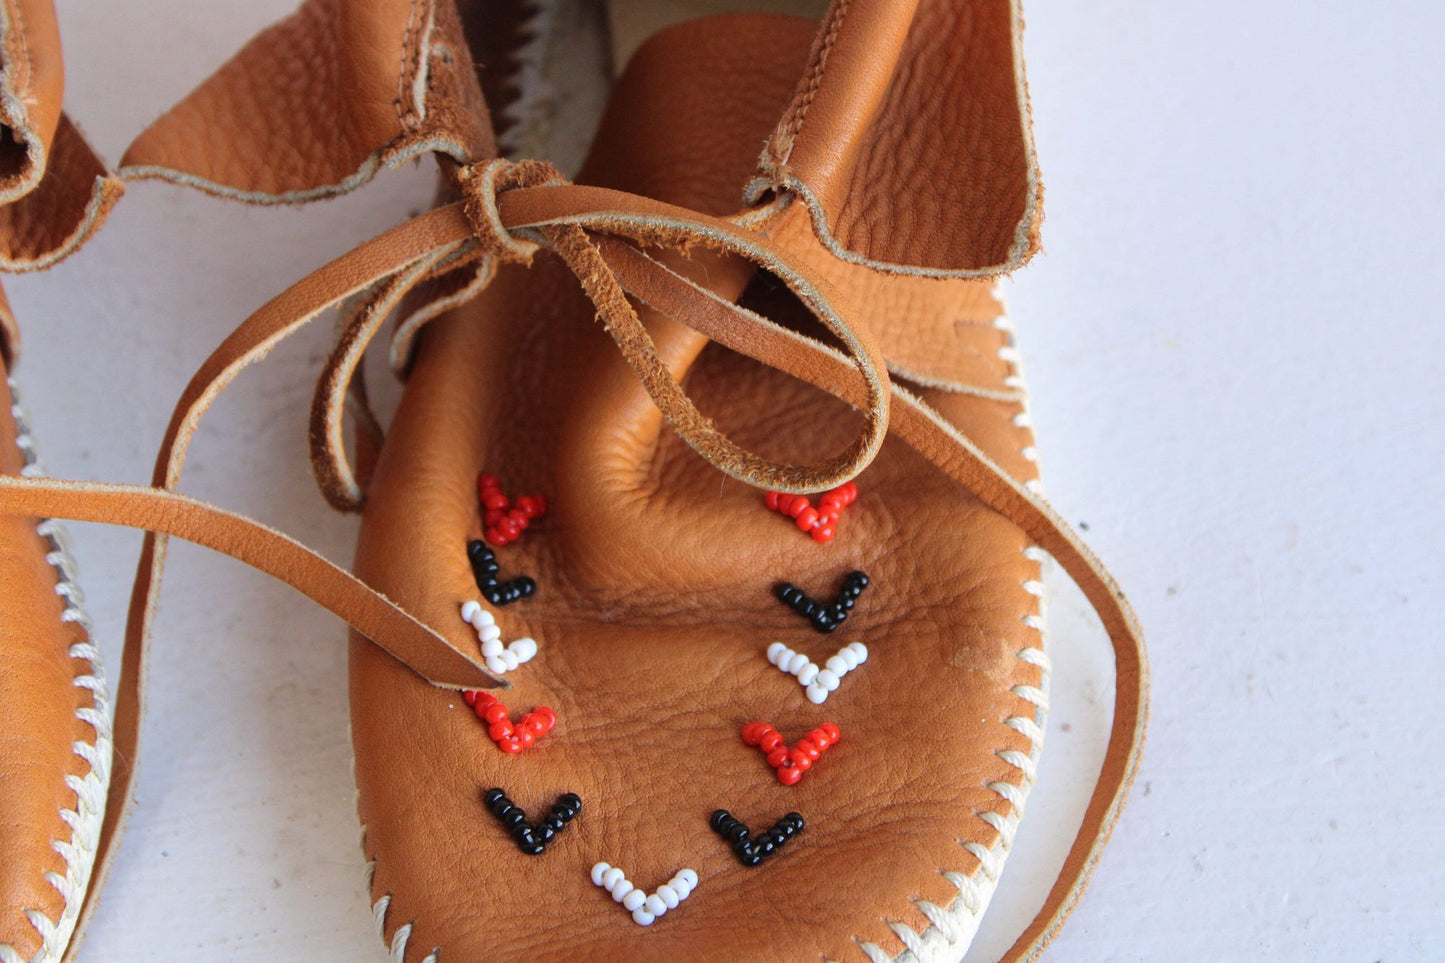 Vintage 1990's Moccasins, Tan Leather with Beading, Tru Moc with Swivel Action, Size 6.5